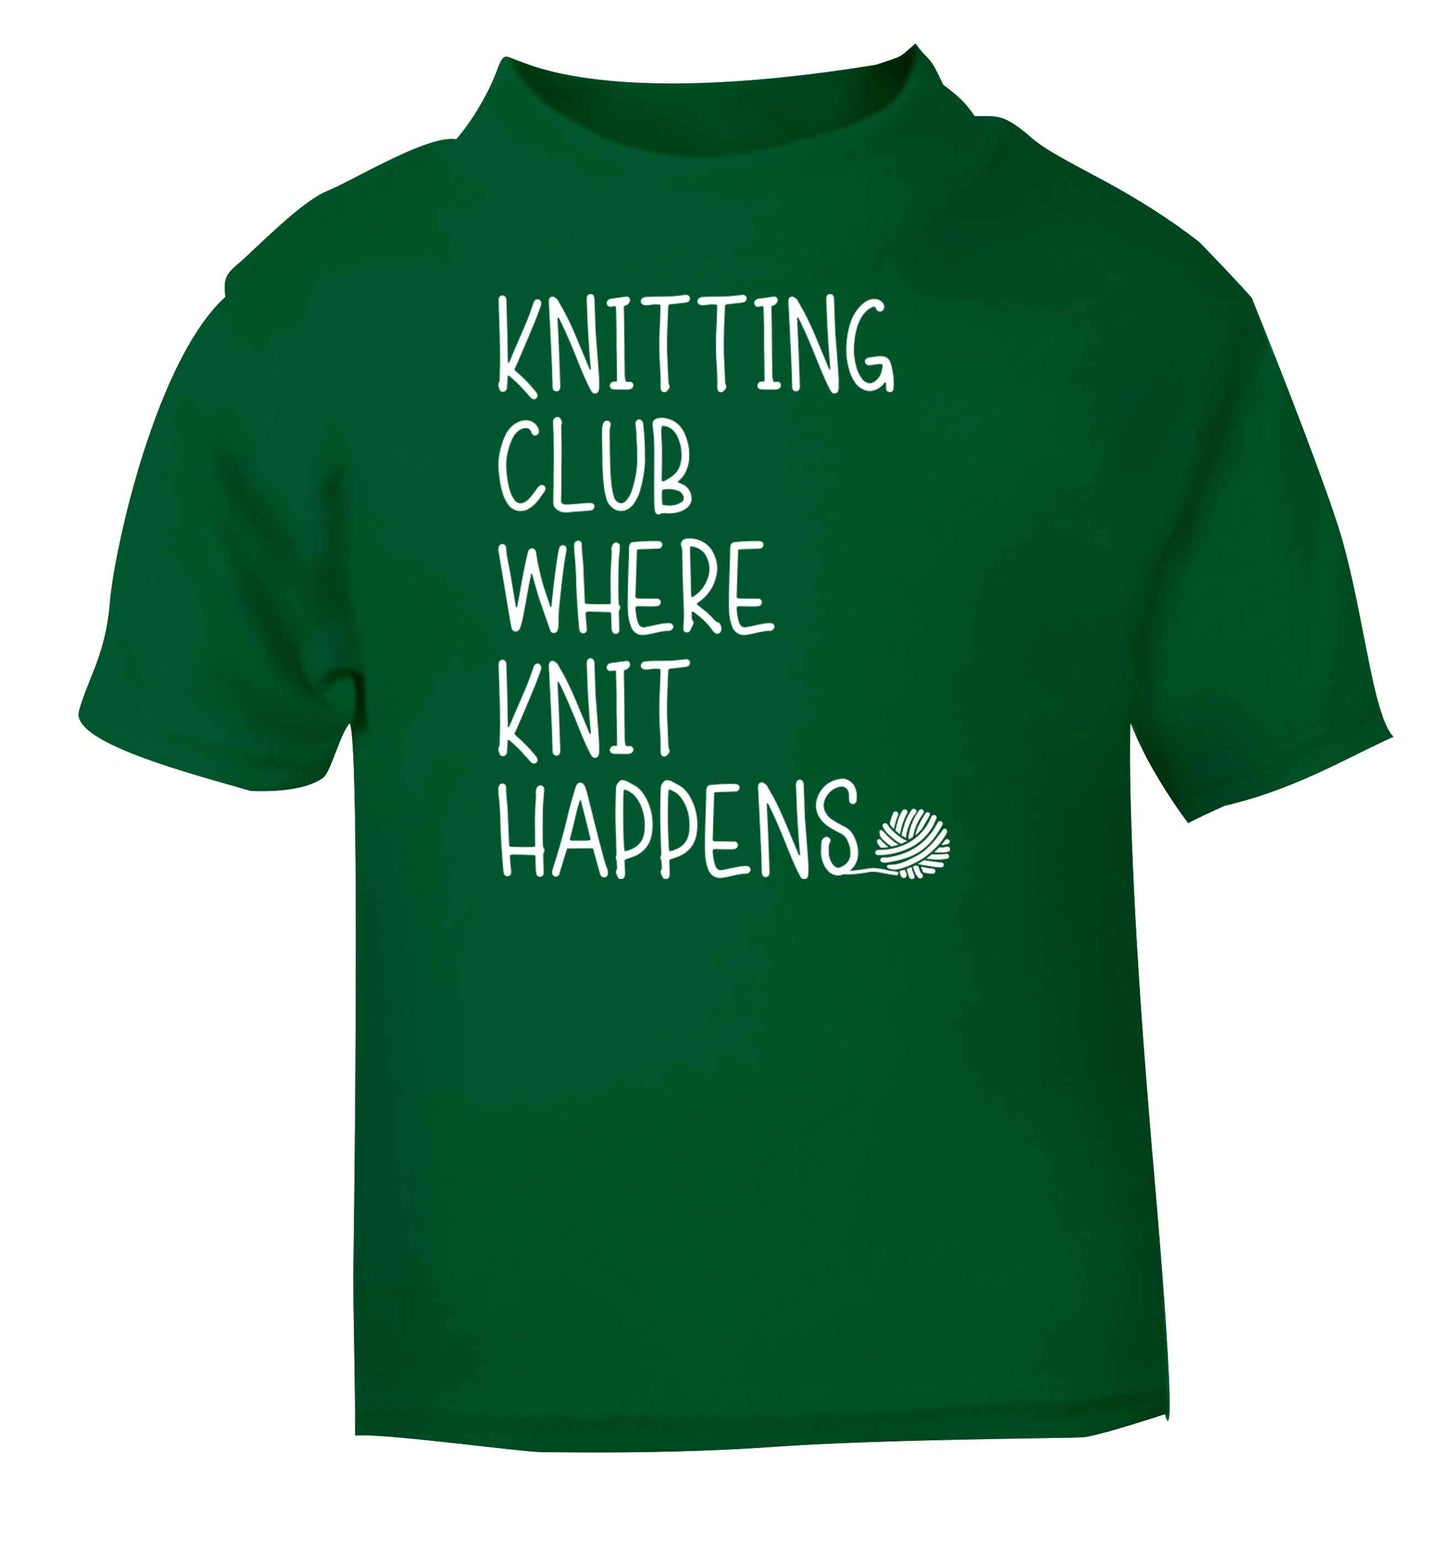 Knitting club where knit happens green baby toddler Tshirt 2 Years